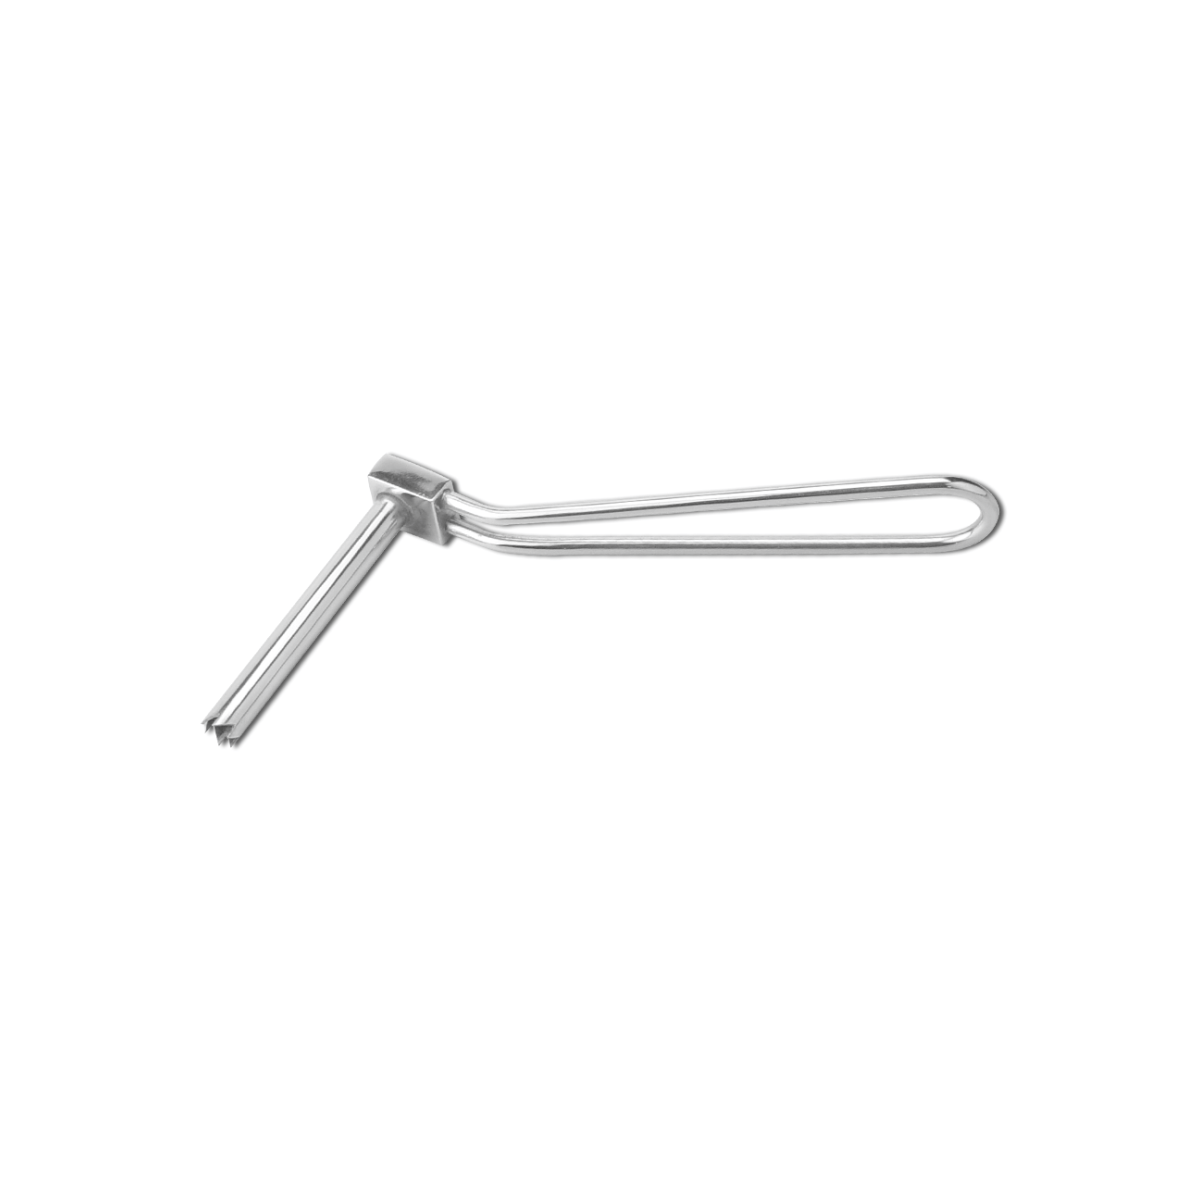 Sleeve with Handle for 6.5mm Cancellous Shanz Pin